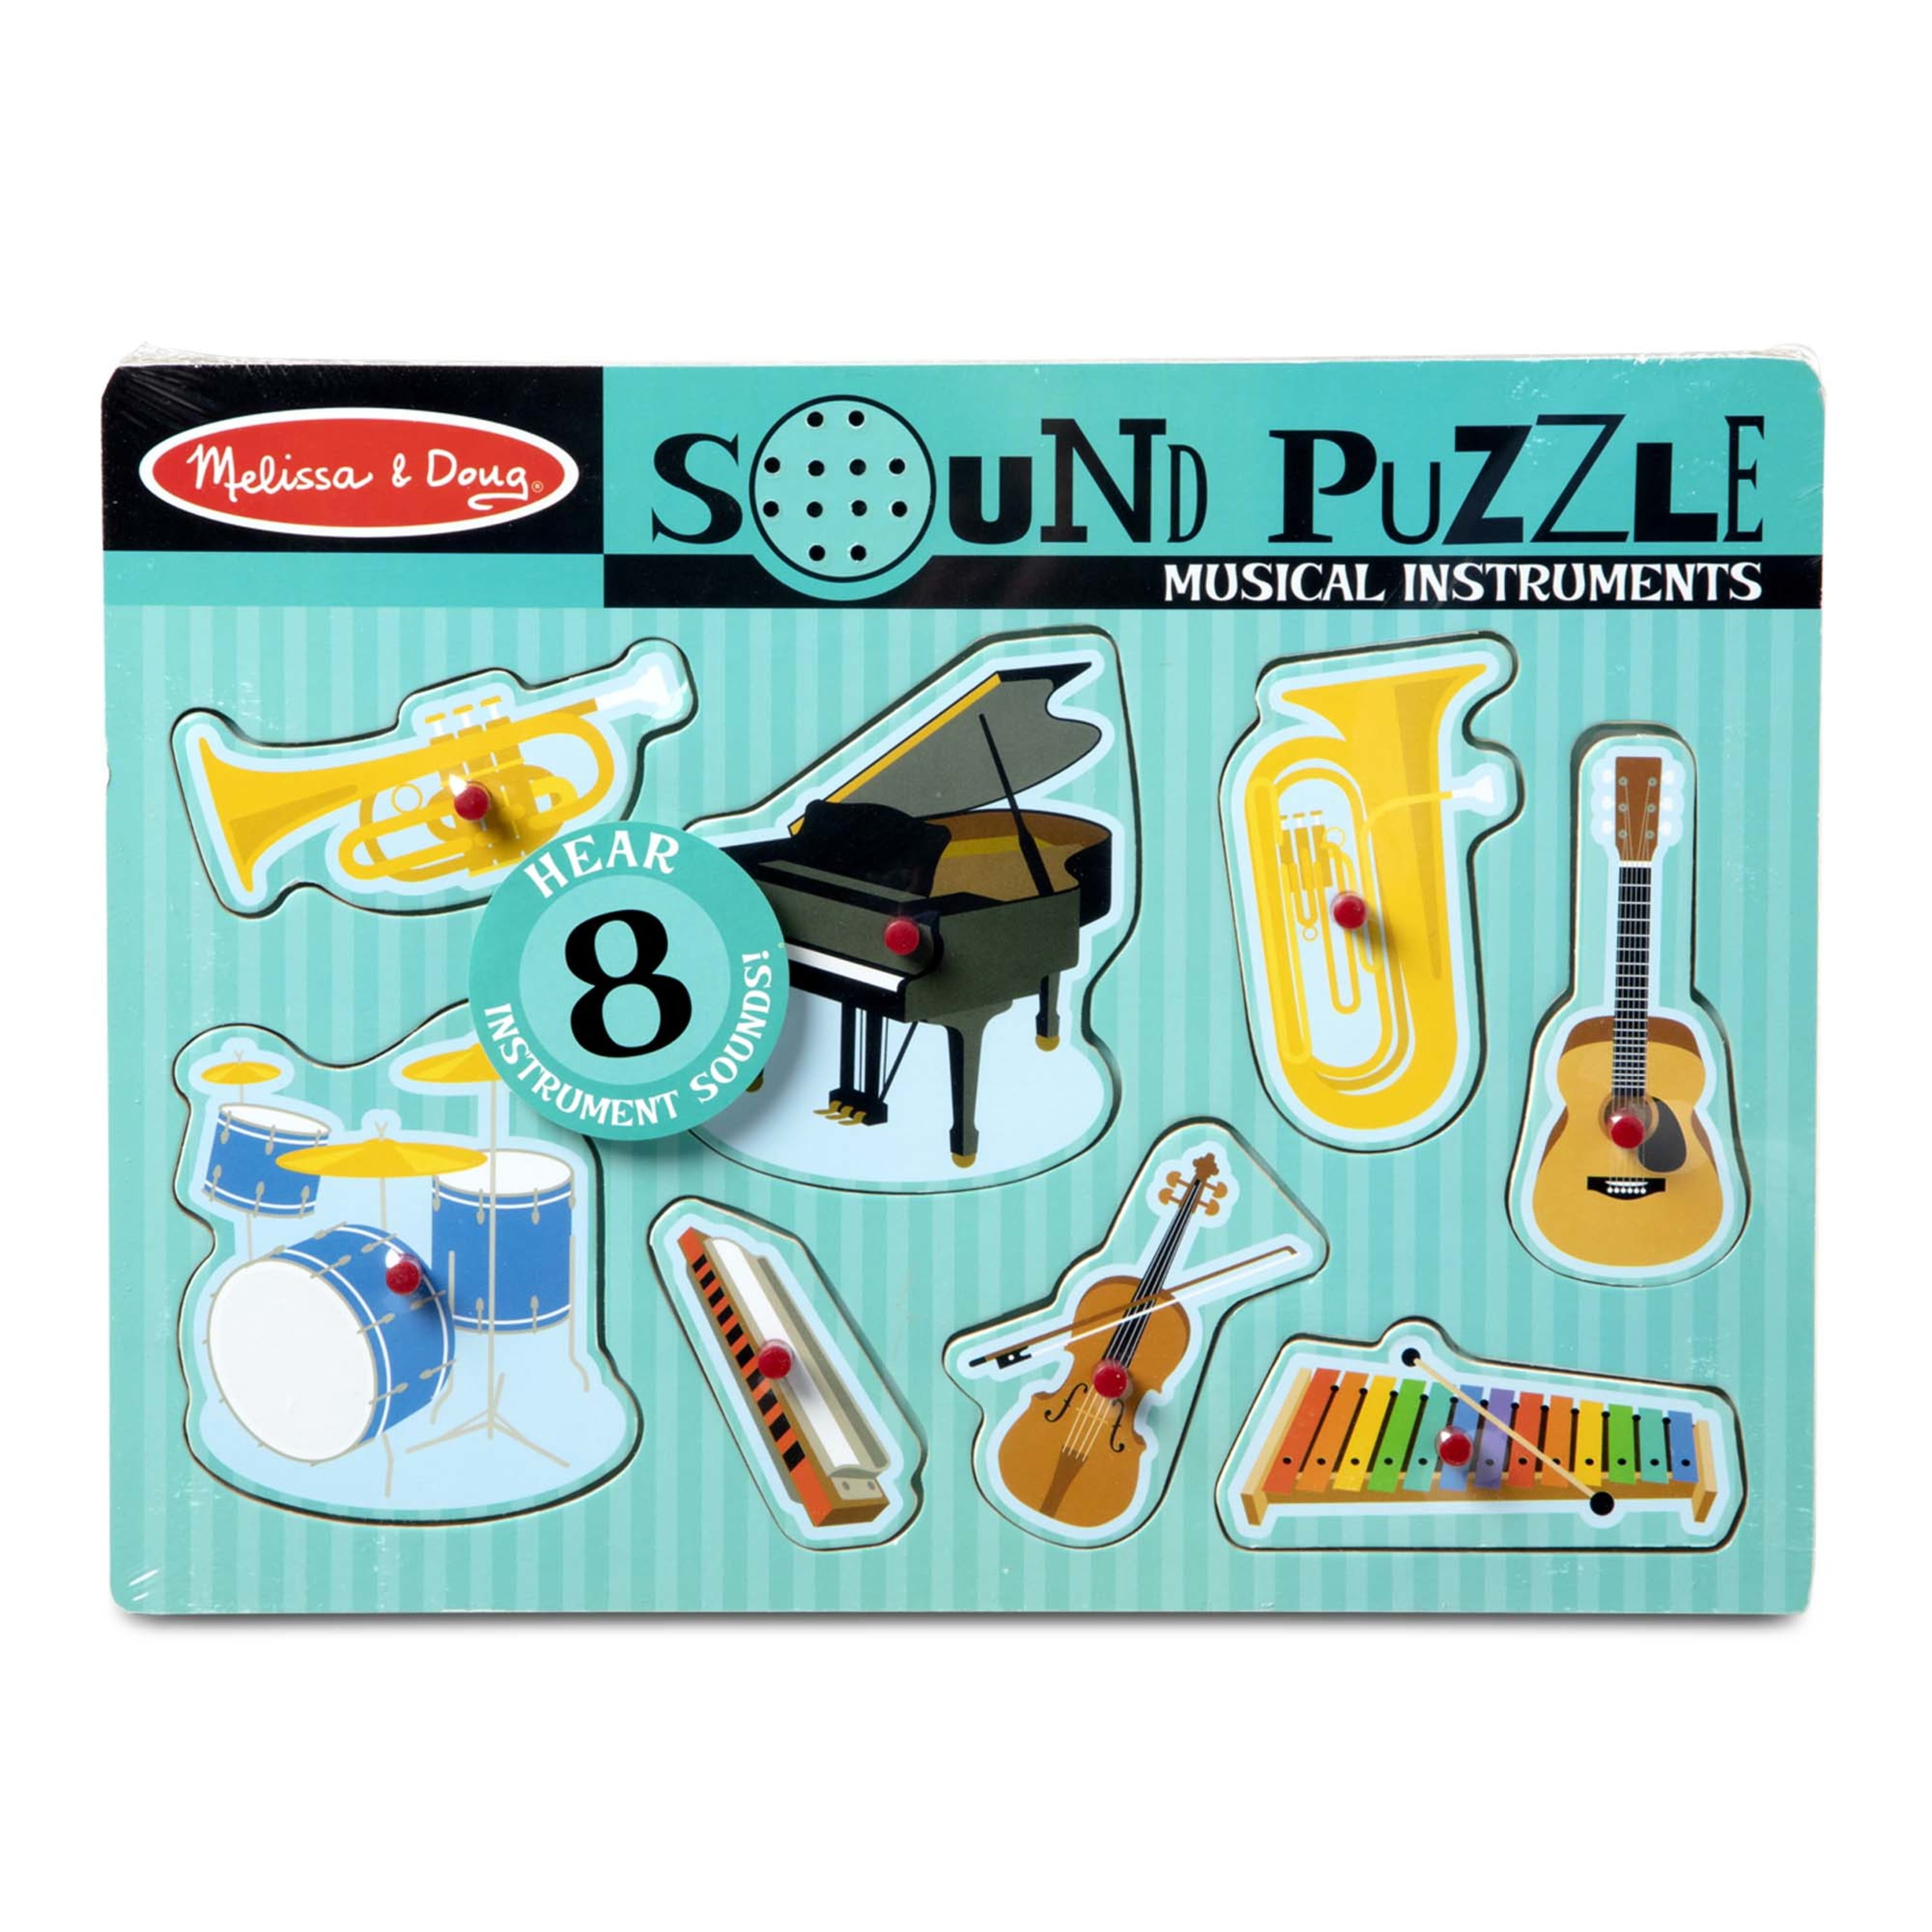 Melissa & Doug Sound Puzzle MUSICAL INSTRUMENTS #732 NEW free shipping 